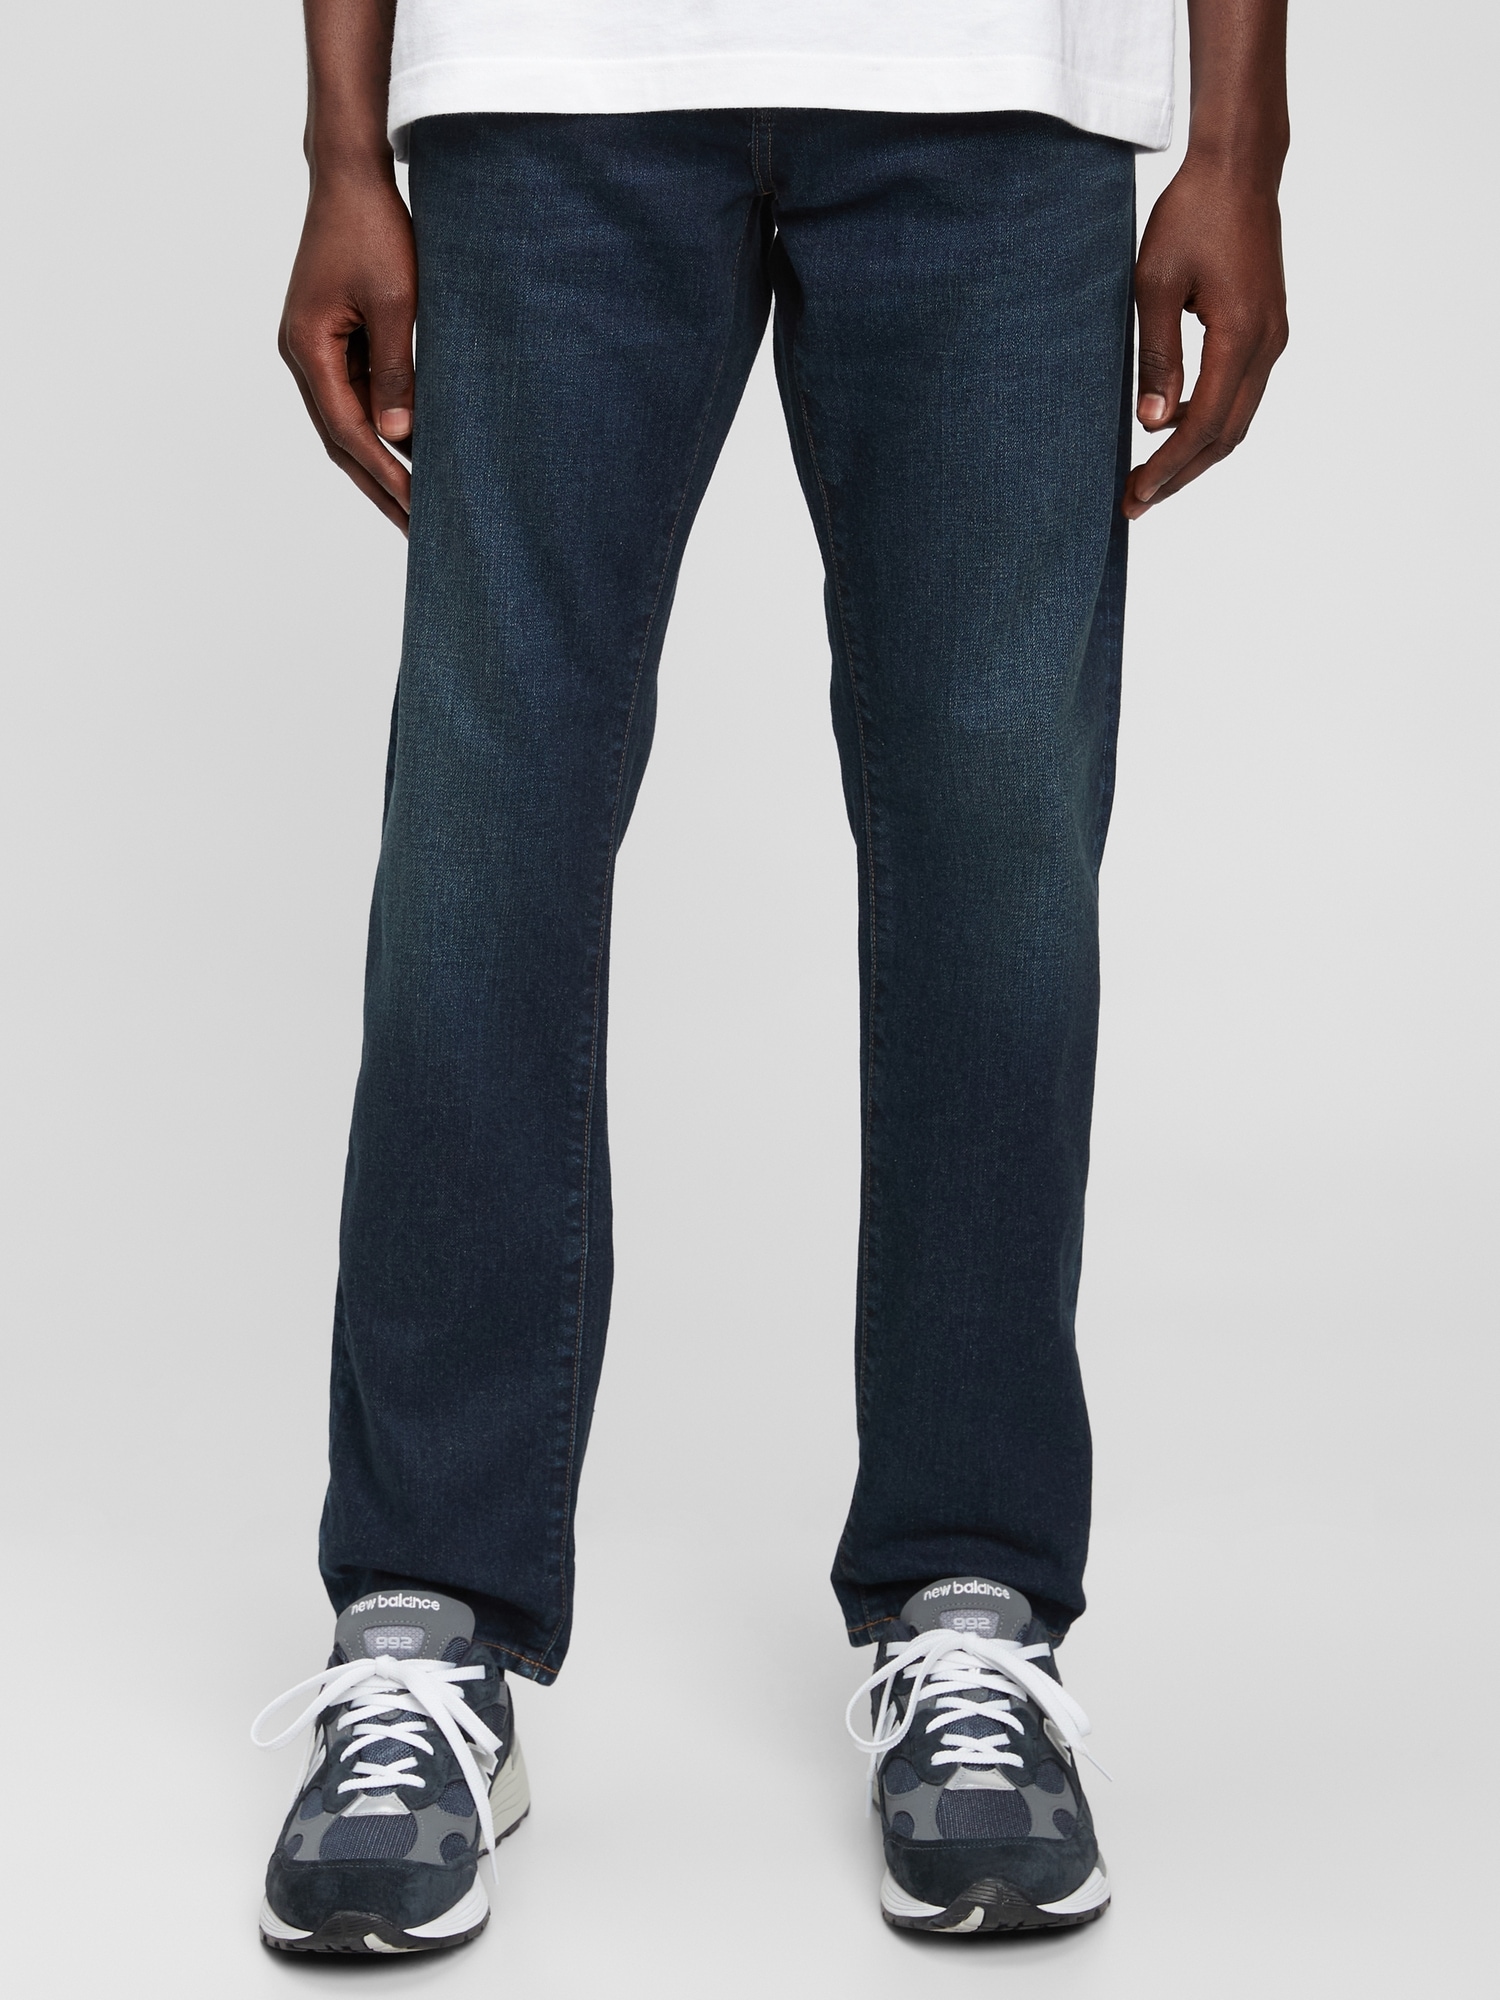 Slim Jeans in Gapflex with Washwell™